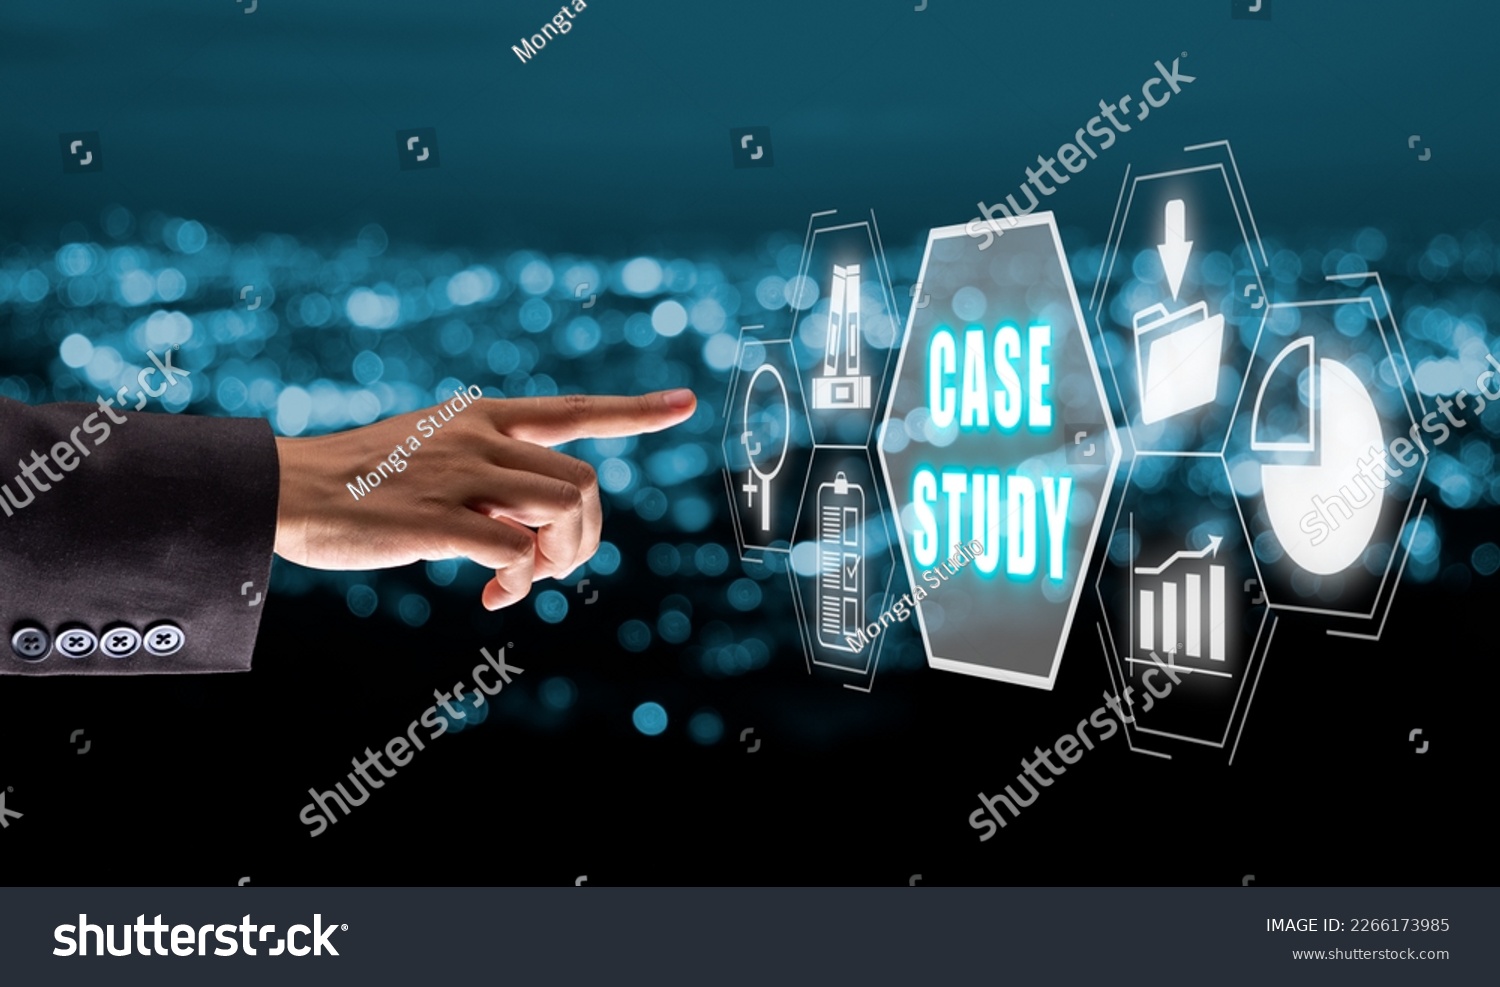 Case Study Education concept, Business hand touching case study icon on virtual with blue bokeh background, Analysis of the situation to find a solution. #2266173985